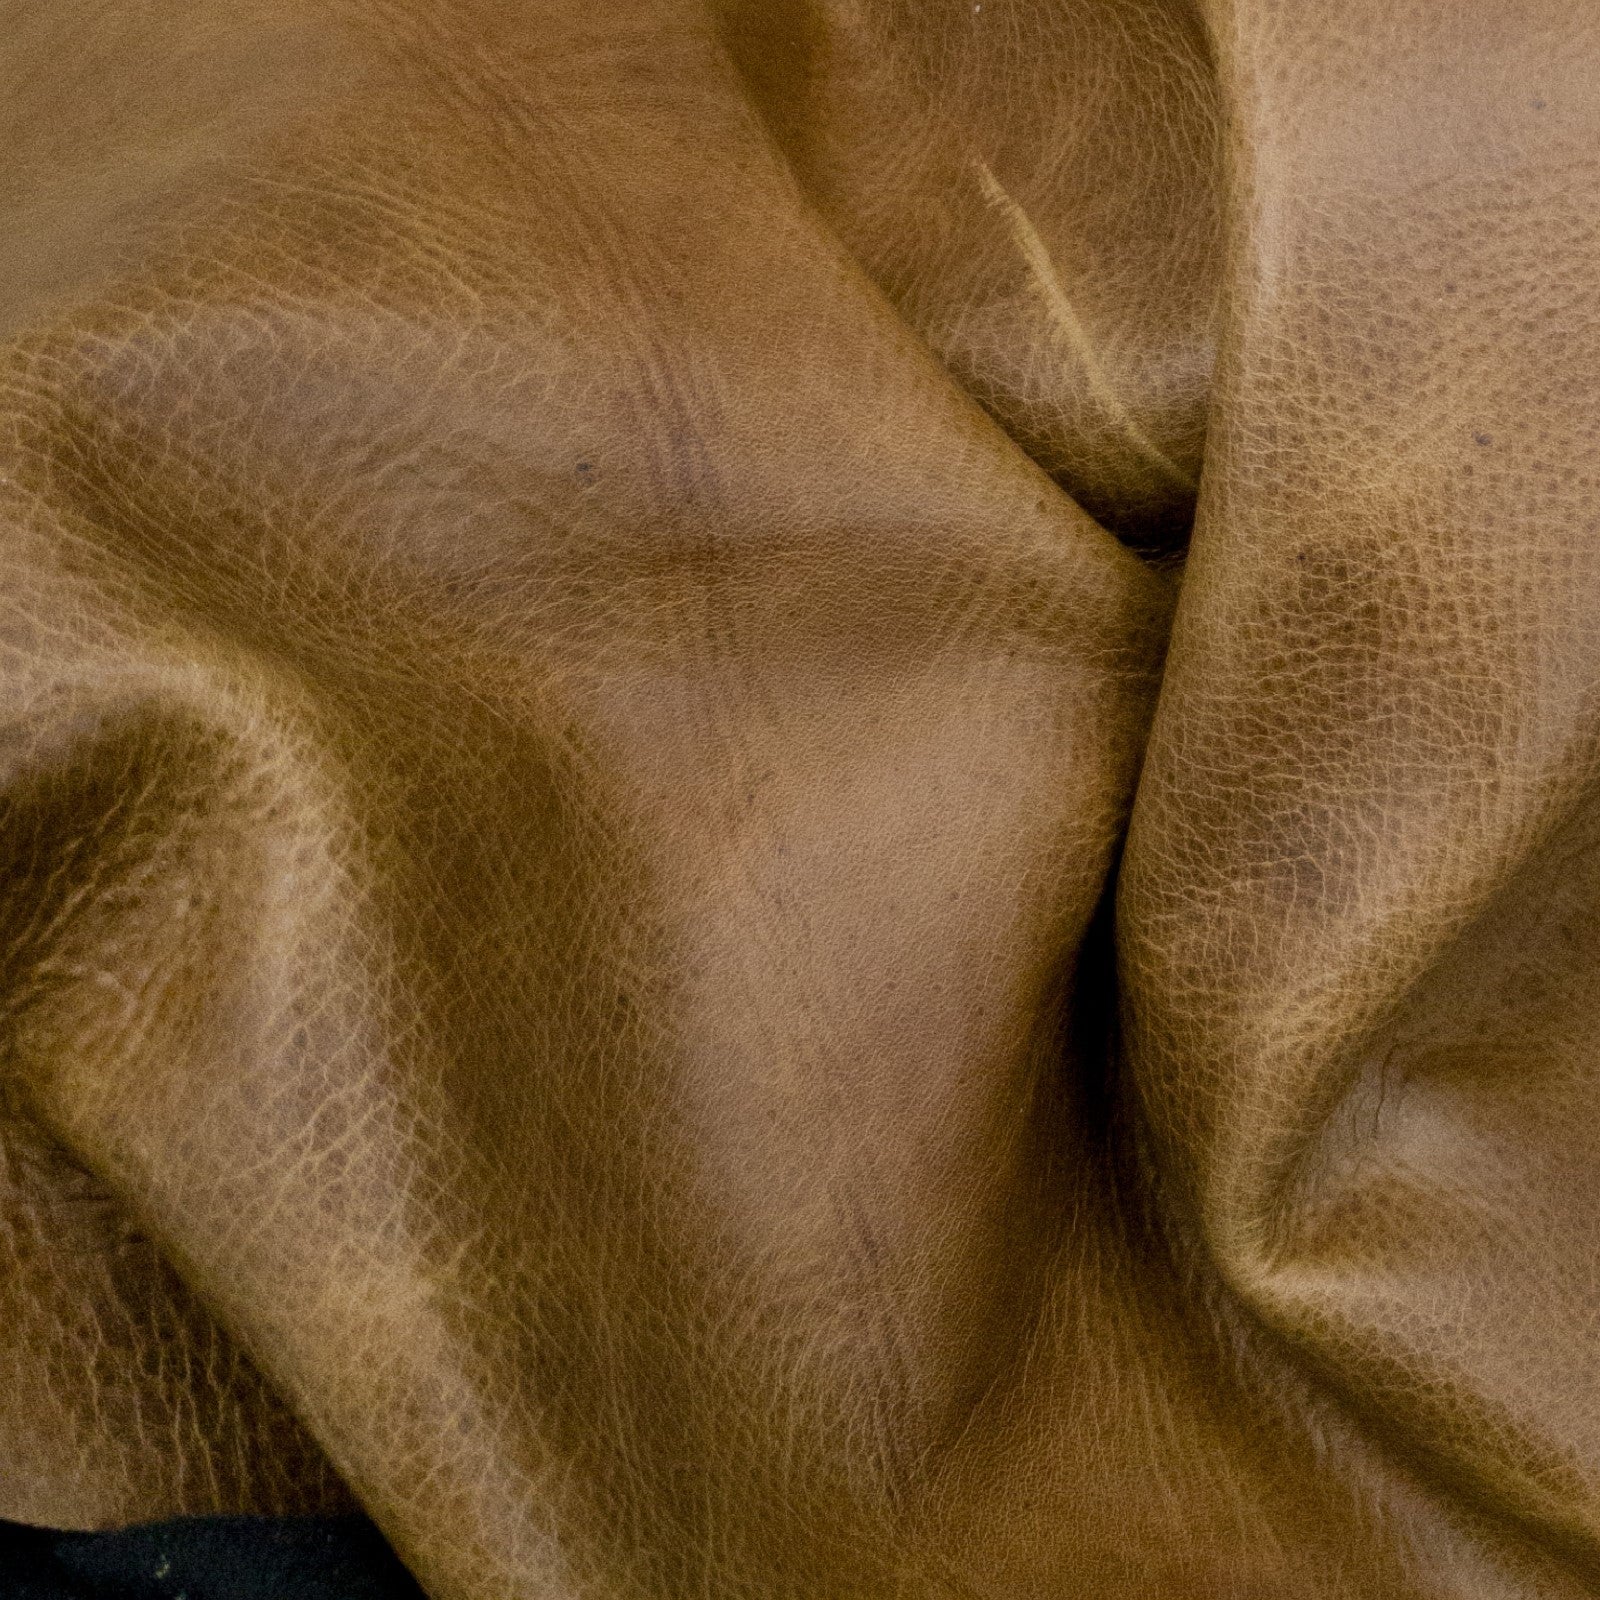 Light-Medium Brown, 2-4 oz, 3-10 Sq Ft, Upholstery Cow Project Pieces, Light Brown 2 (3-4oz) / 7-10 Sq Ft | The Leather Guy